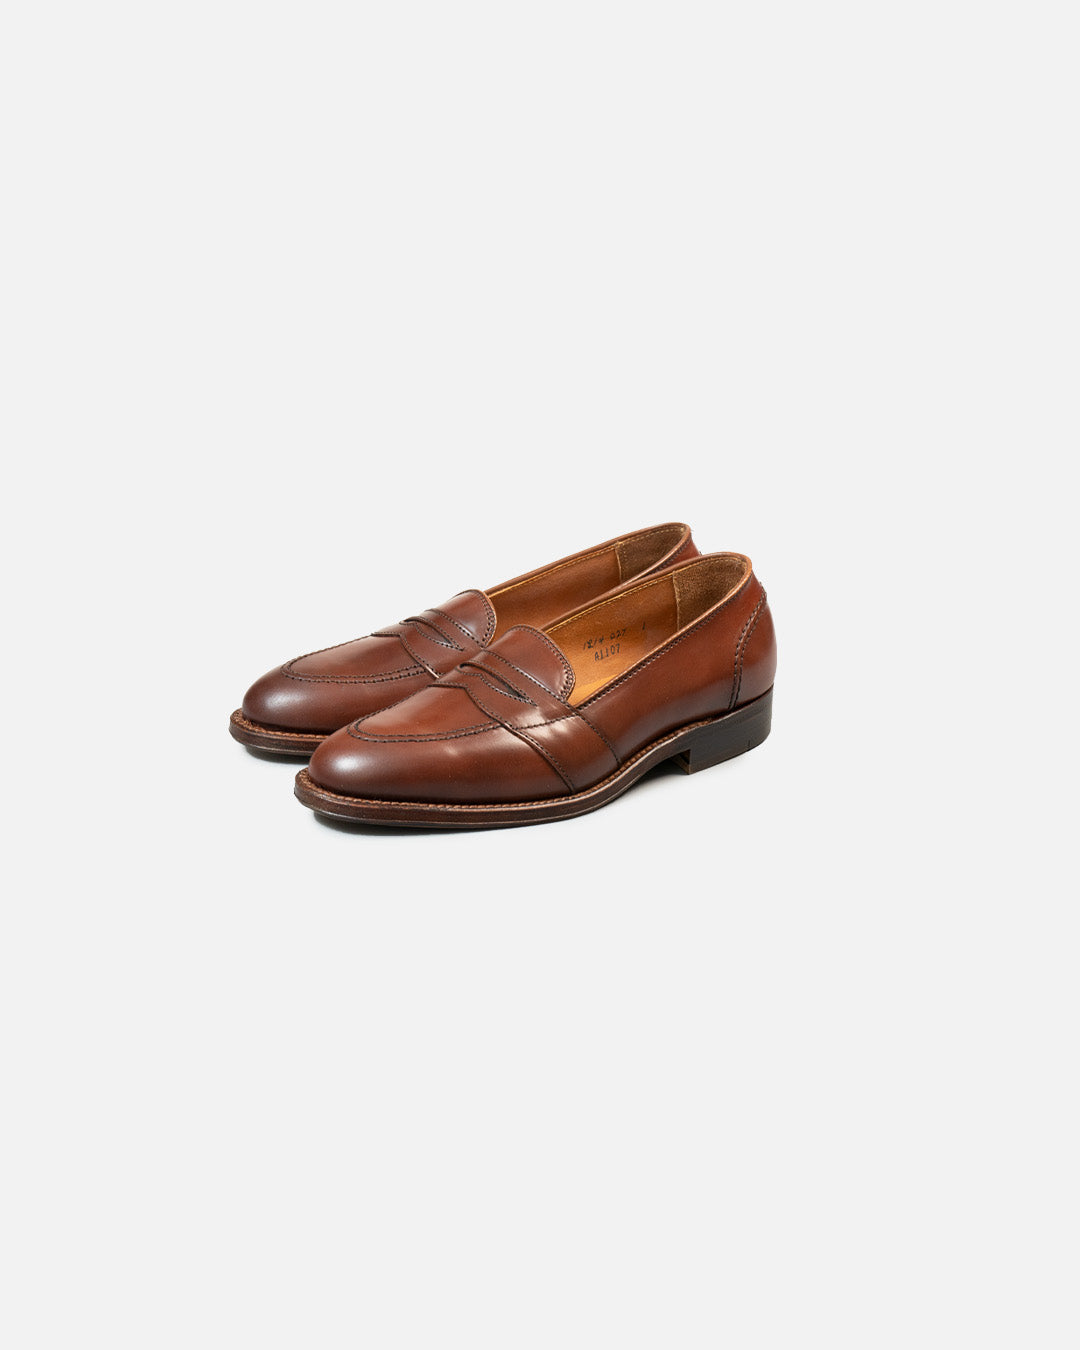 Alden Full Strap Loafers Color 4 Shell Cordovan A1107D